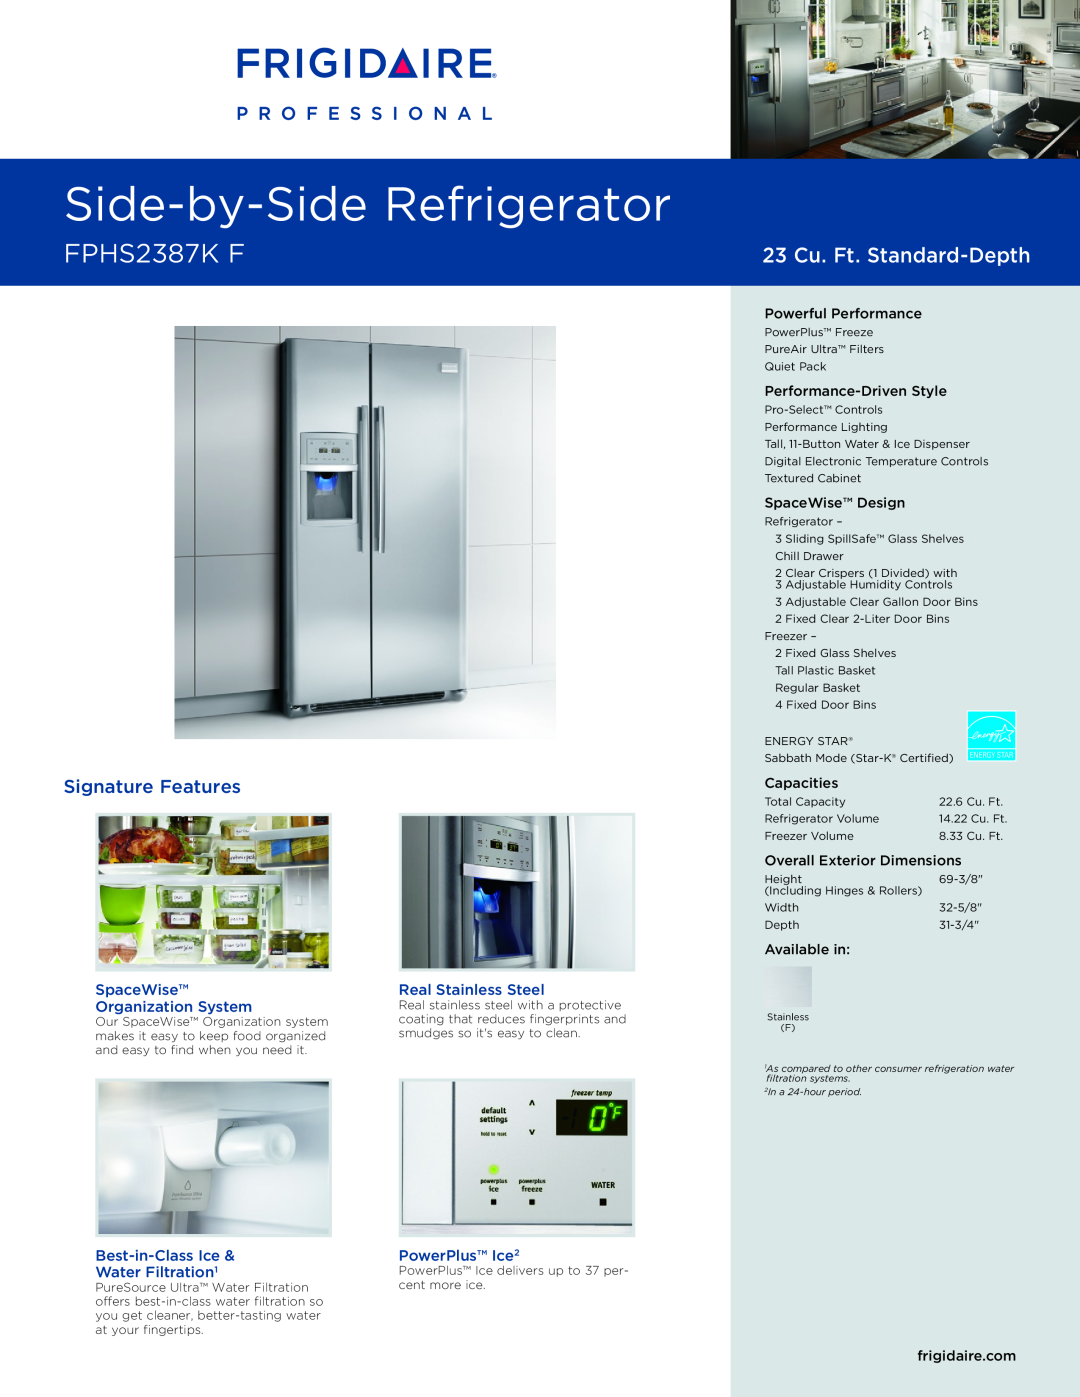 Frigidaire FPHS2387K dimensions SpaceWise, Real Stainless Steel, Organization System, Best-in-ClassIce, PowerPlus Ice2 